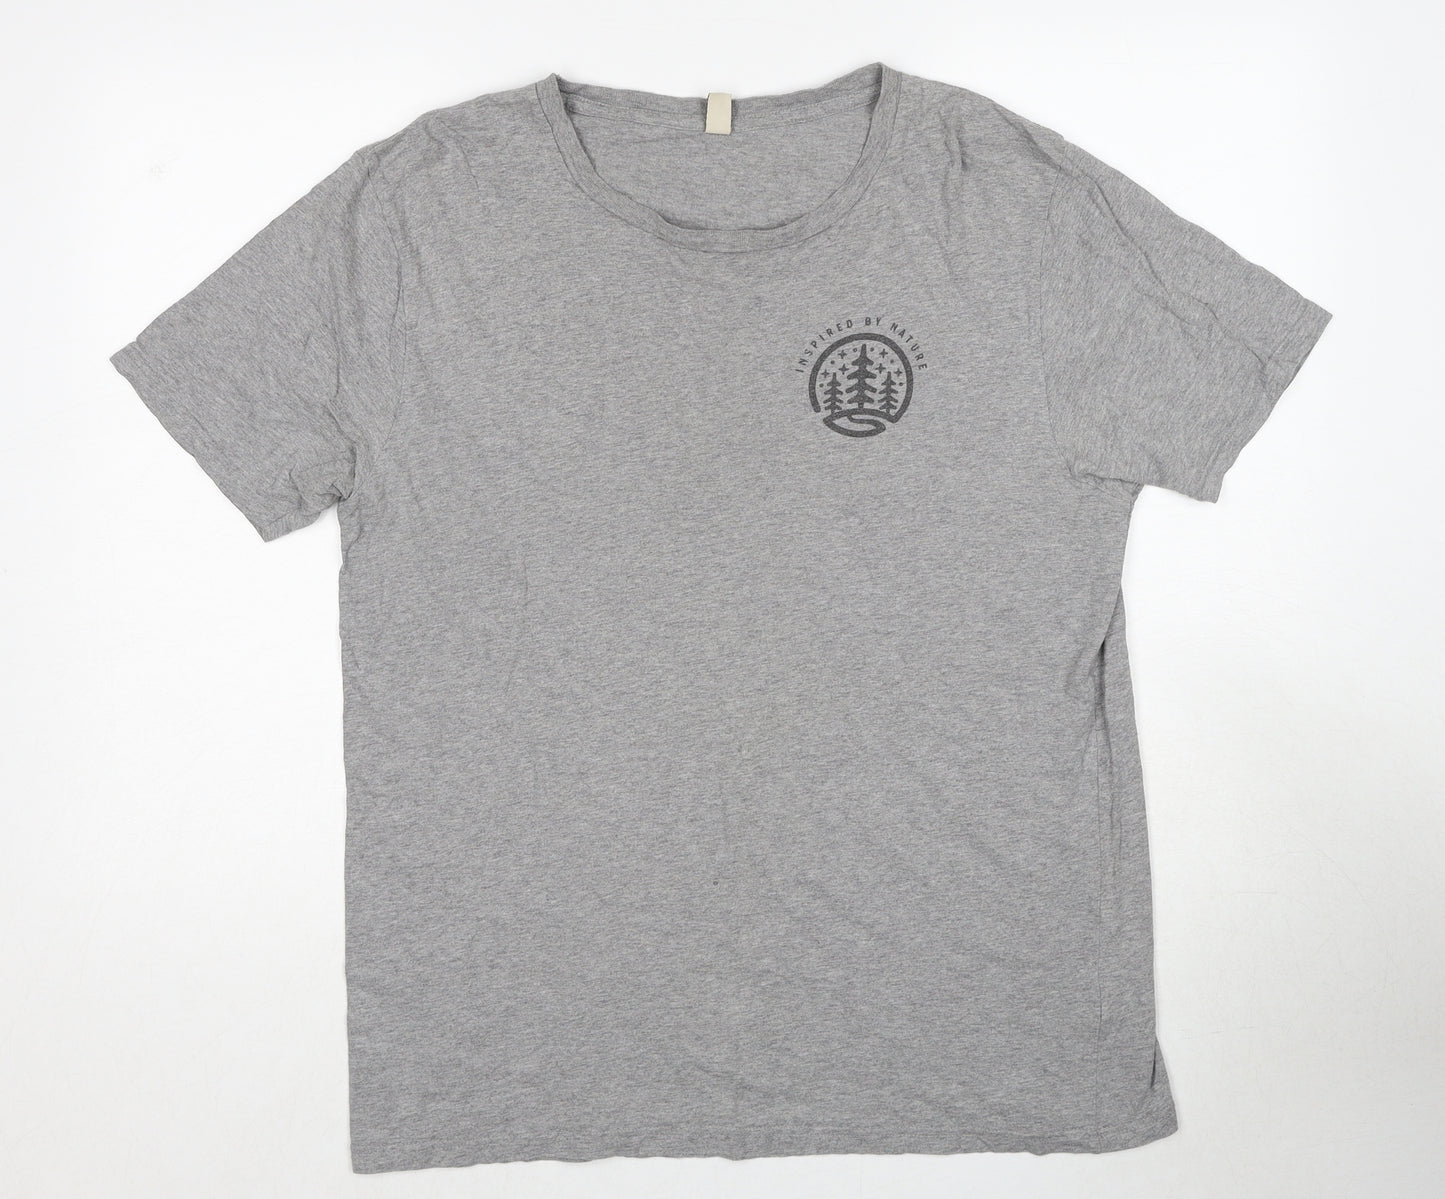 Earth Positive Mens Grey Cotton T-Shirt Size L Round Neck - Inspired By Nature